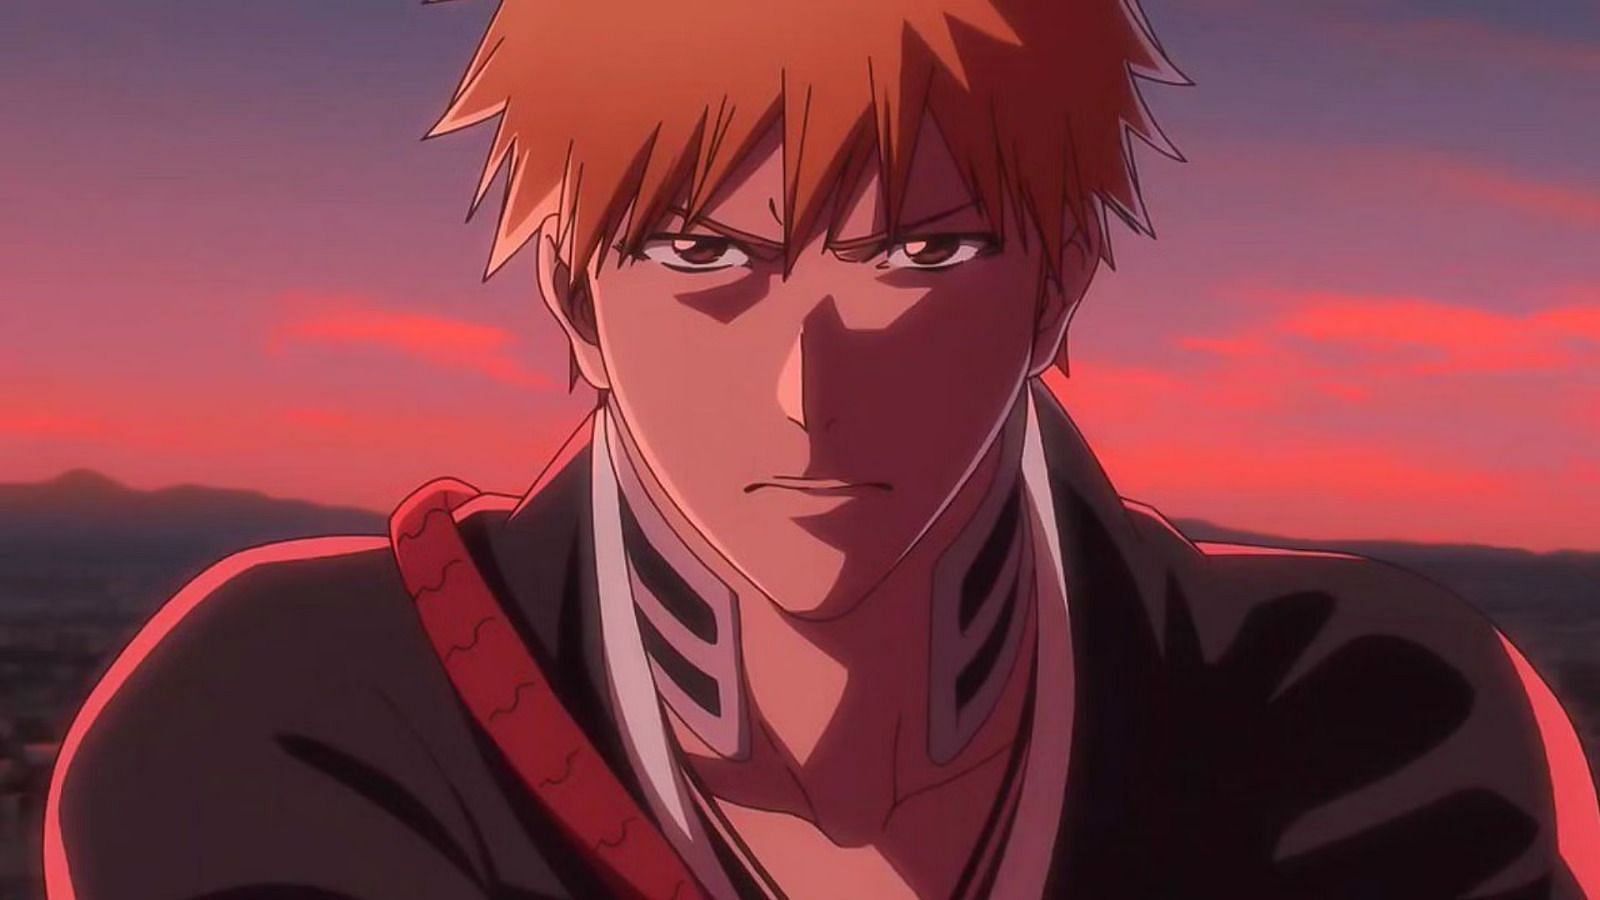 How many seasons does Bleach have? Every season in chronological order